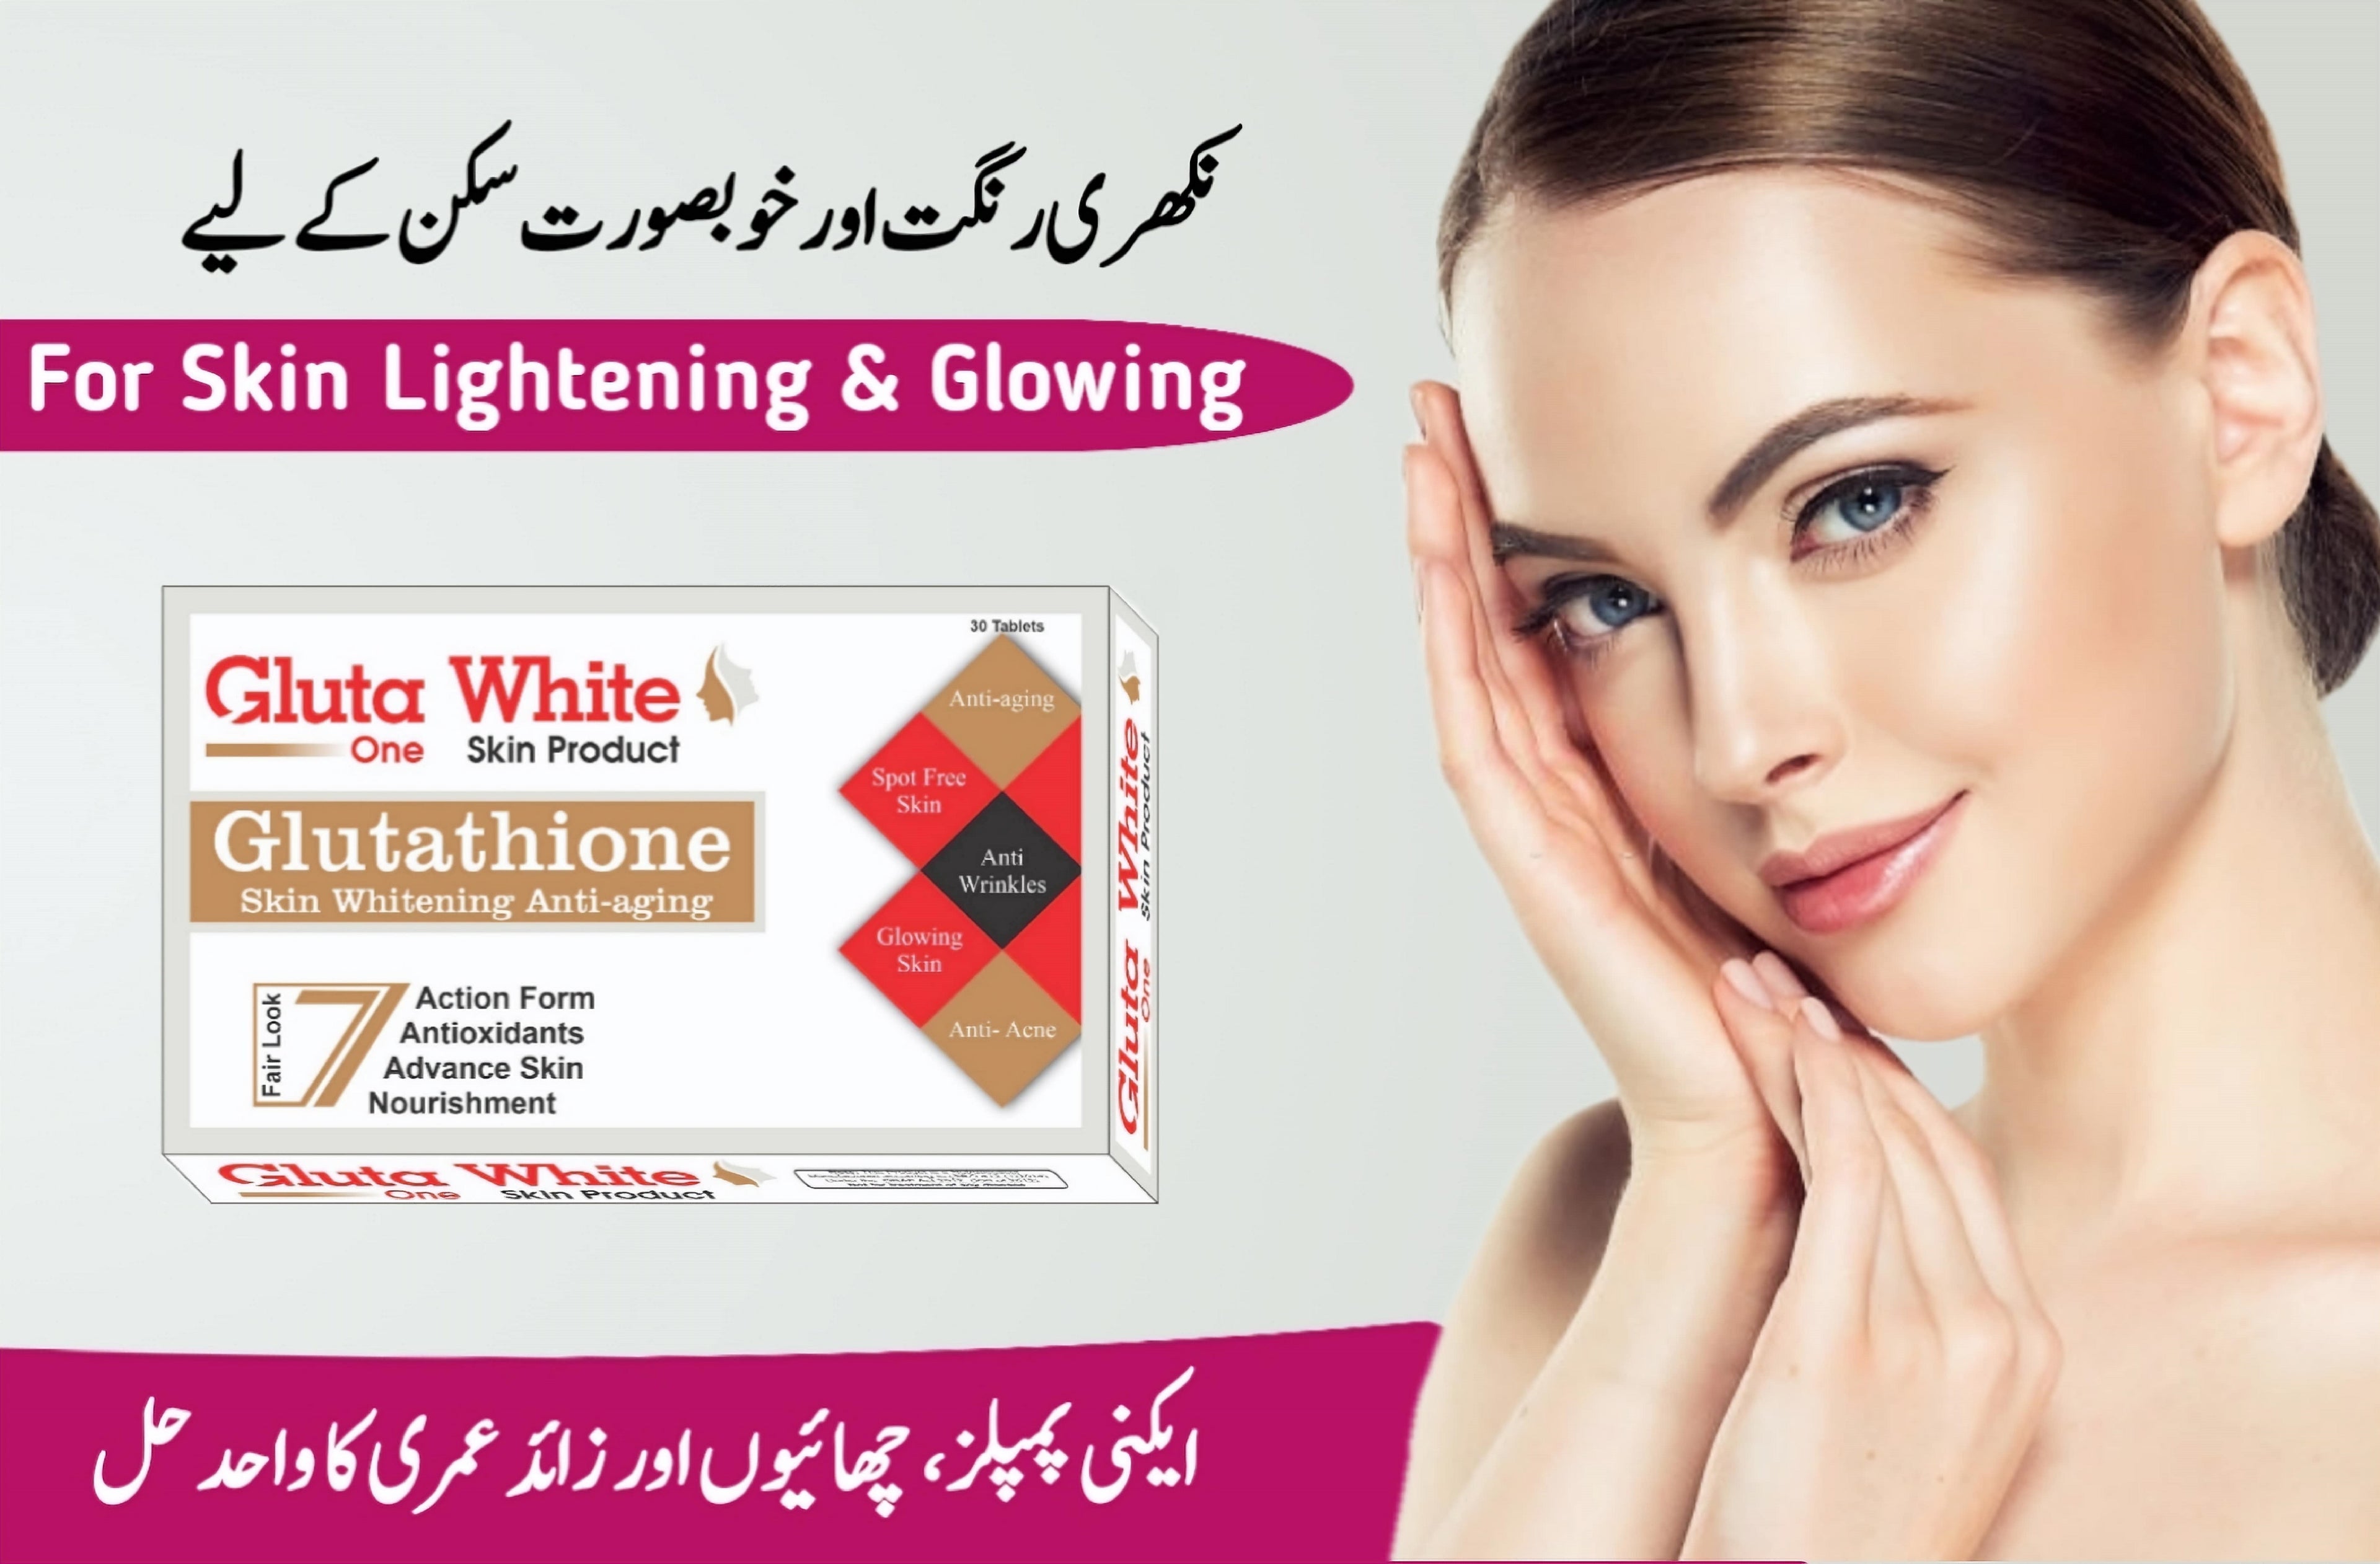 gluta white skin whitening tablets in pakistan contain 500mg glutathione for full body fairness and whitening in few days with affordable price in lahore karachi islamabad peshawar